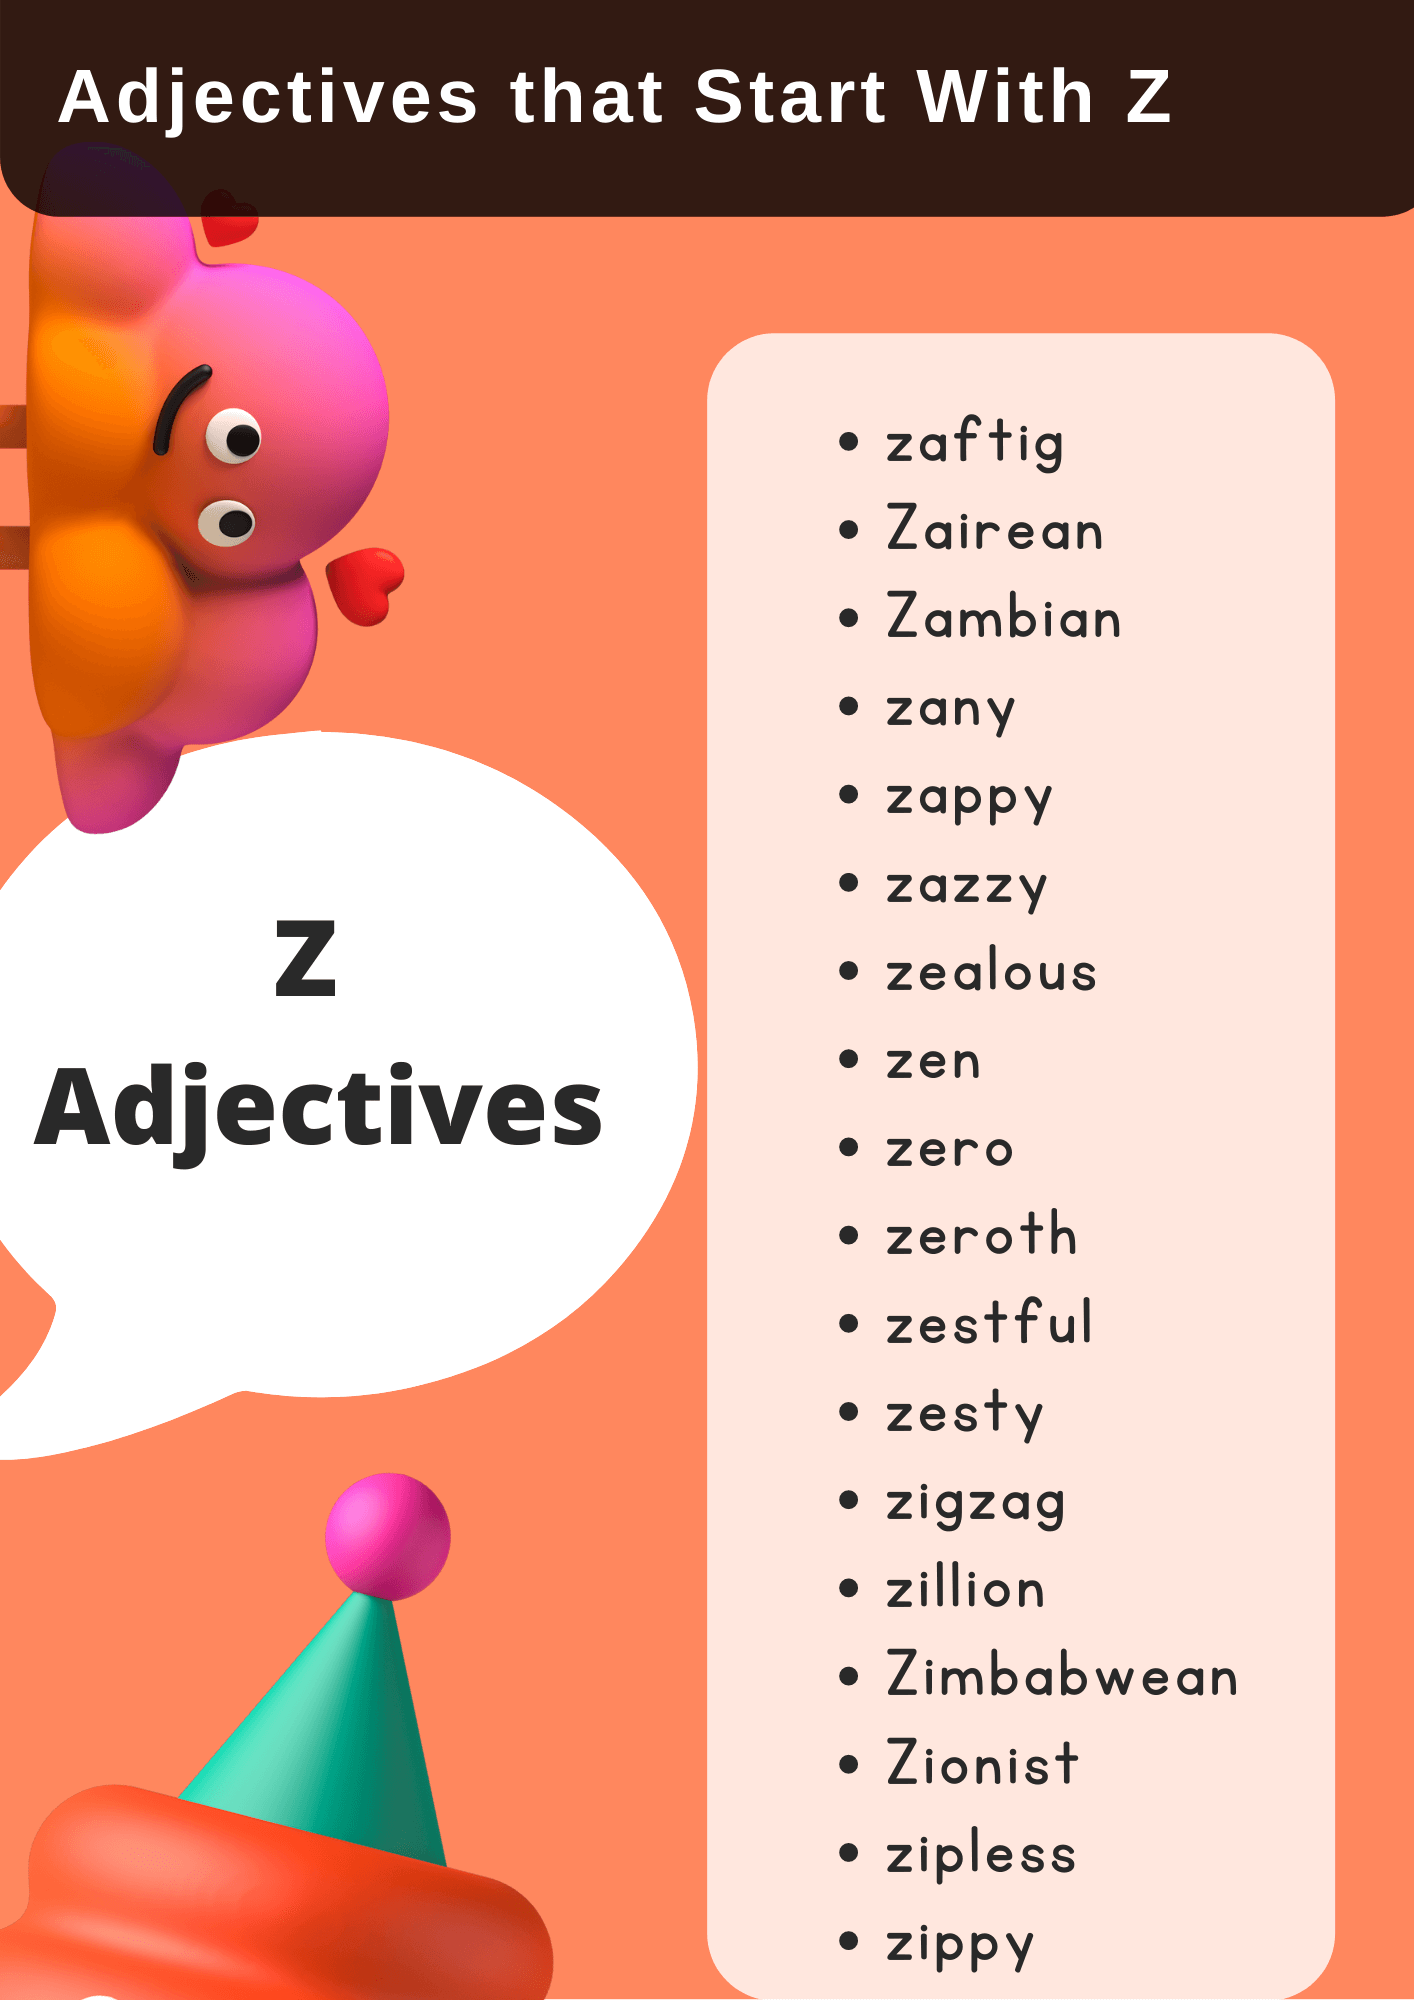 Adjectives that Start with Z